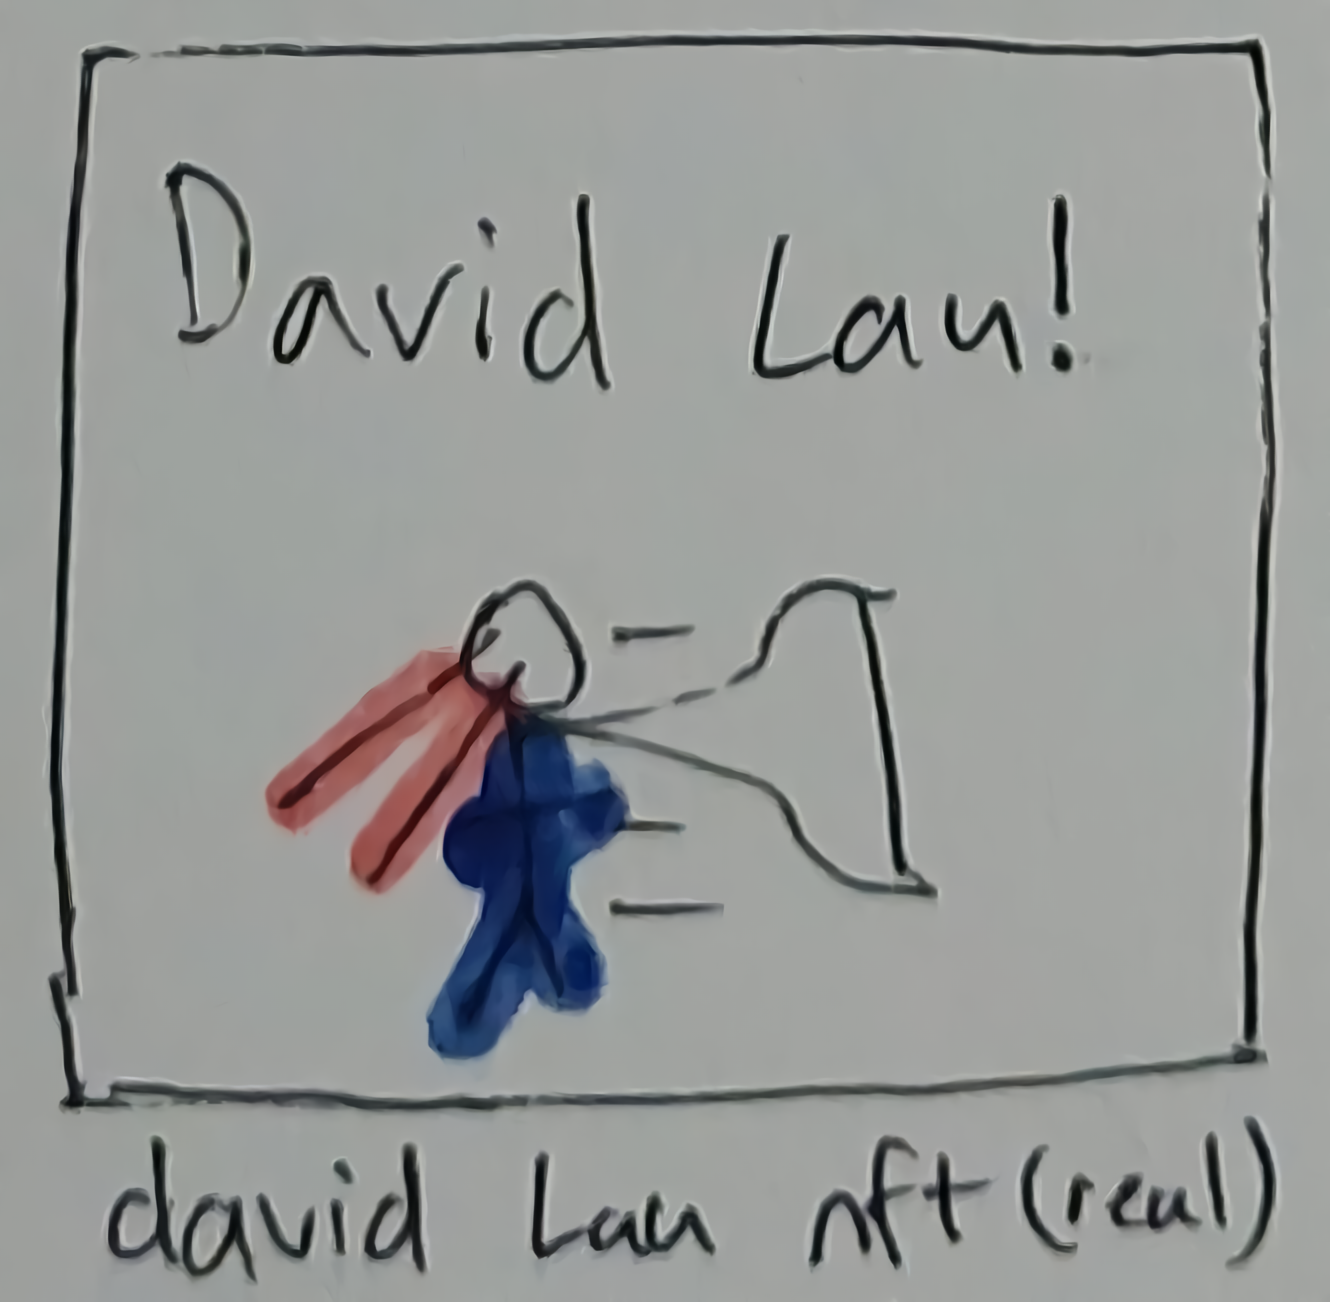 "realistic" depiction of David Lau looking like The Boy's Homelander and shooting laser beams from his eyes.